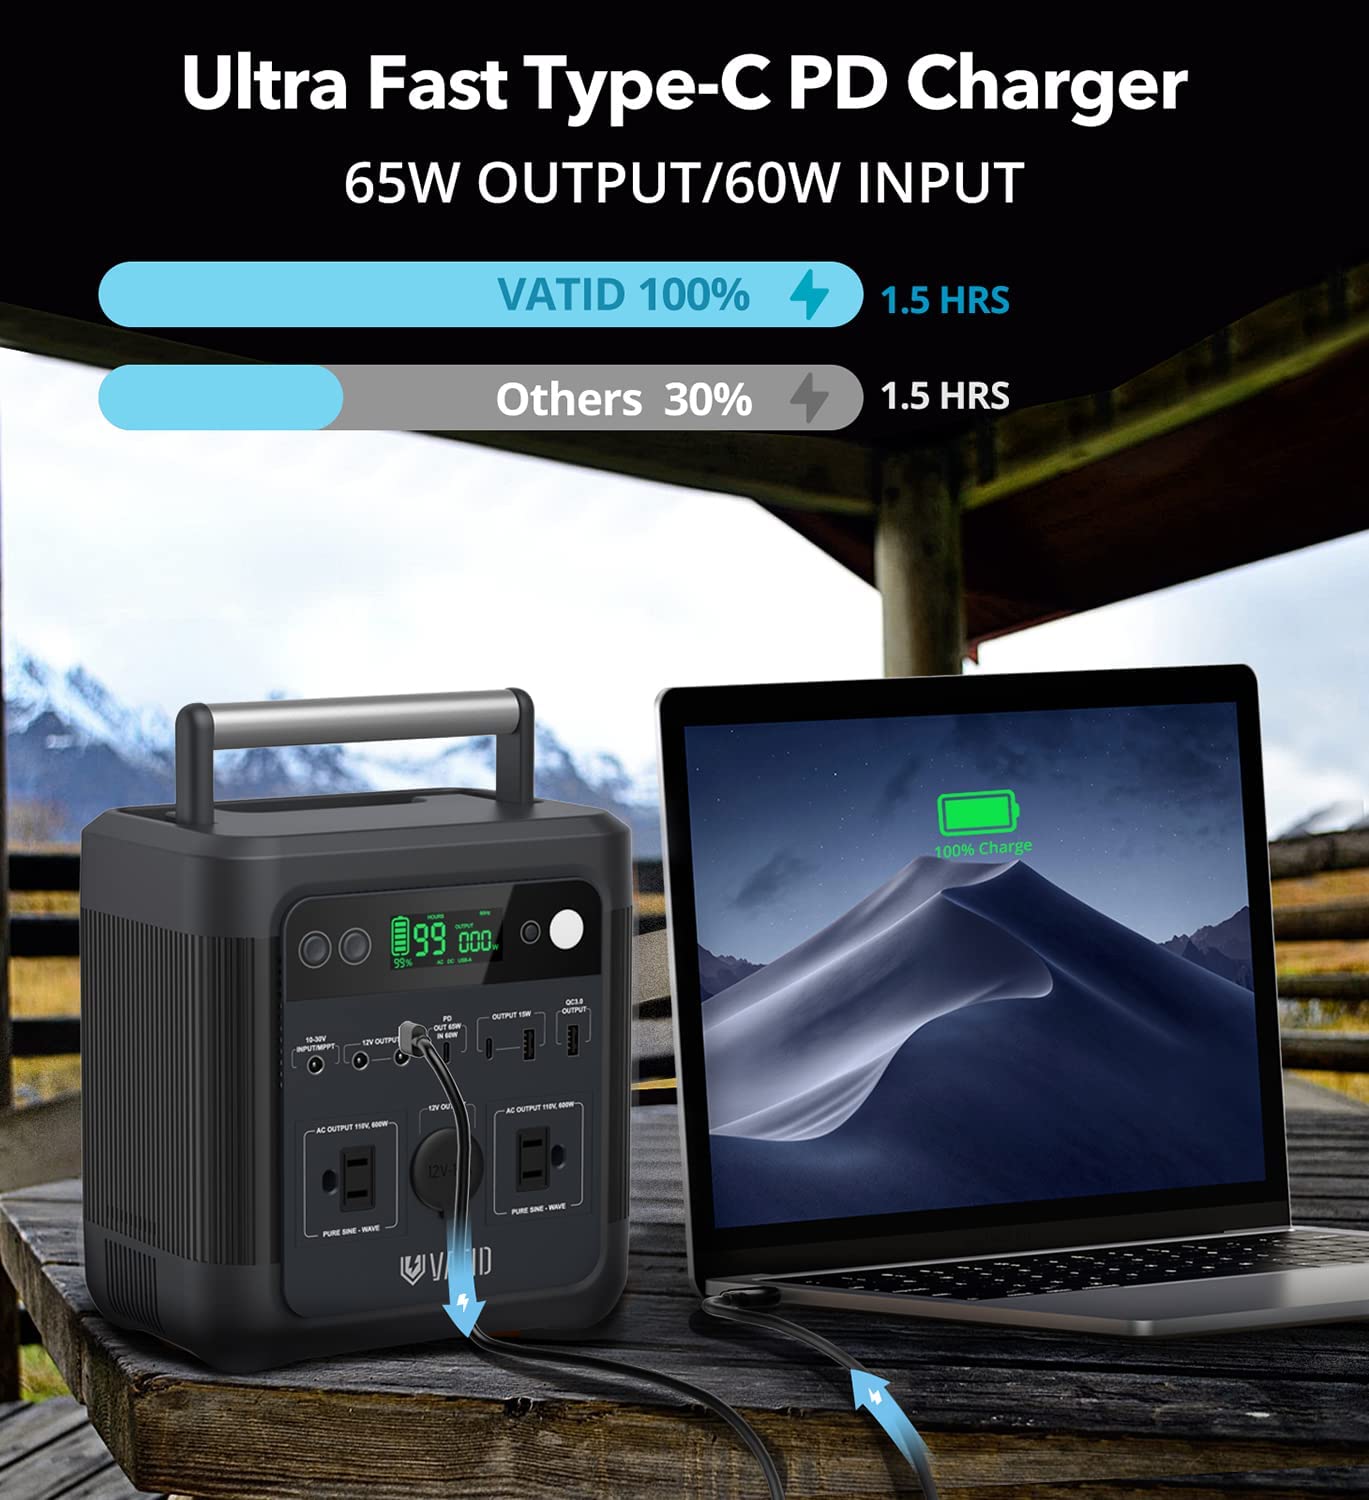 VATID 600W Portable Power Station,3.5hrs Fully Recharge,518Wh